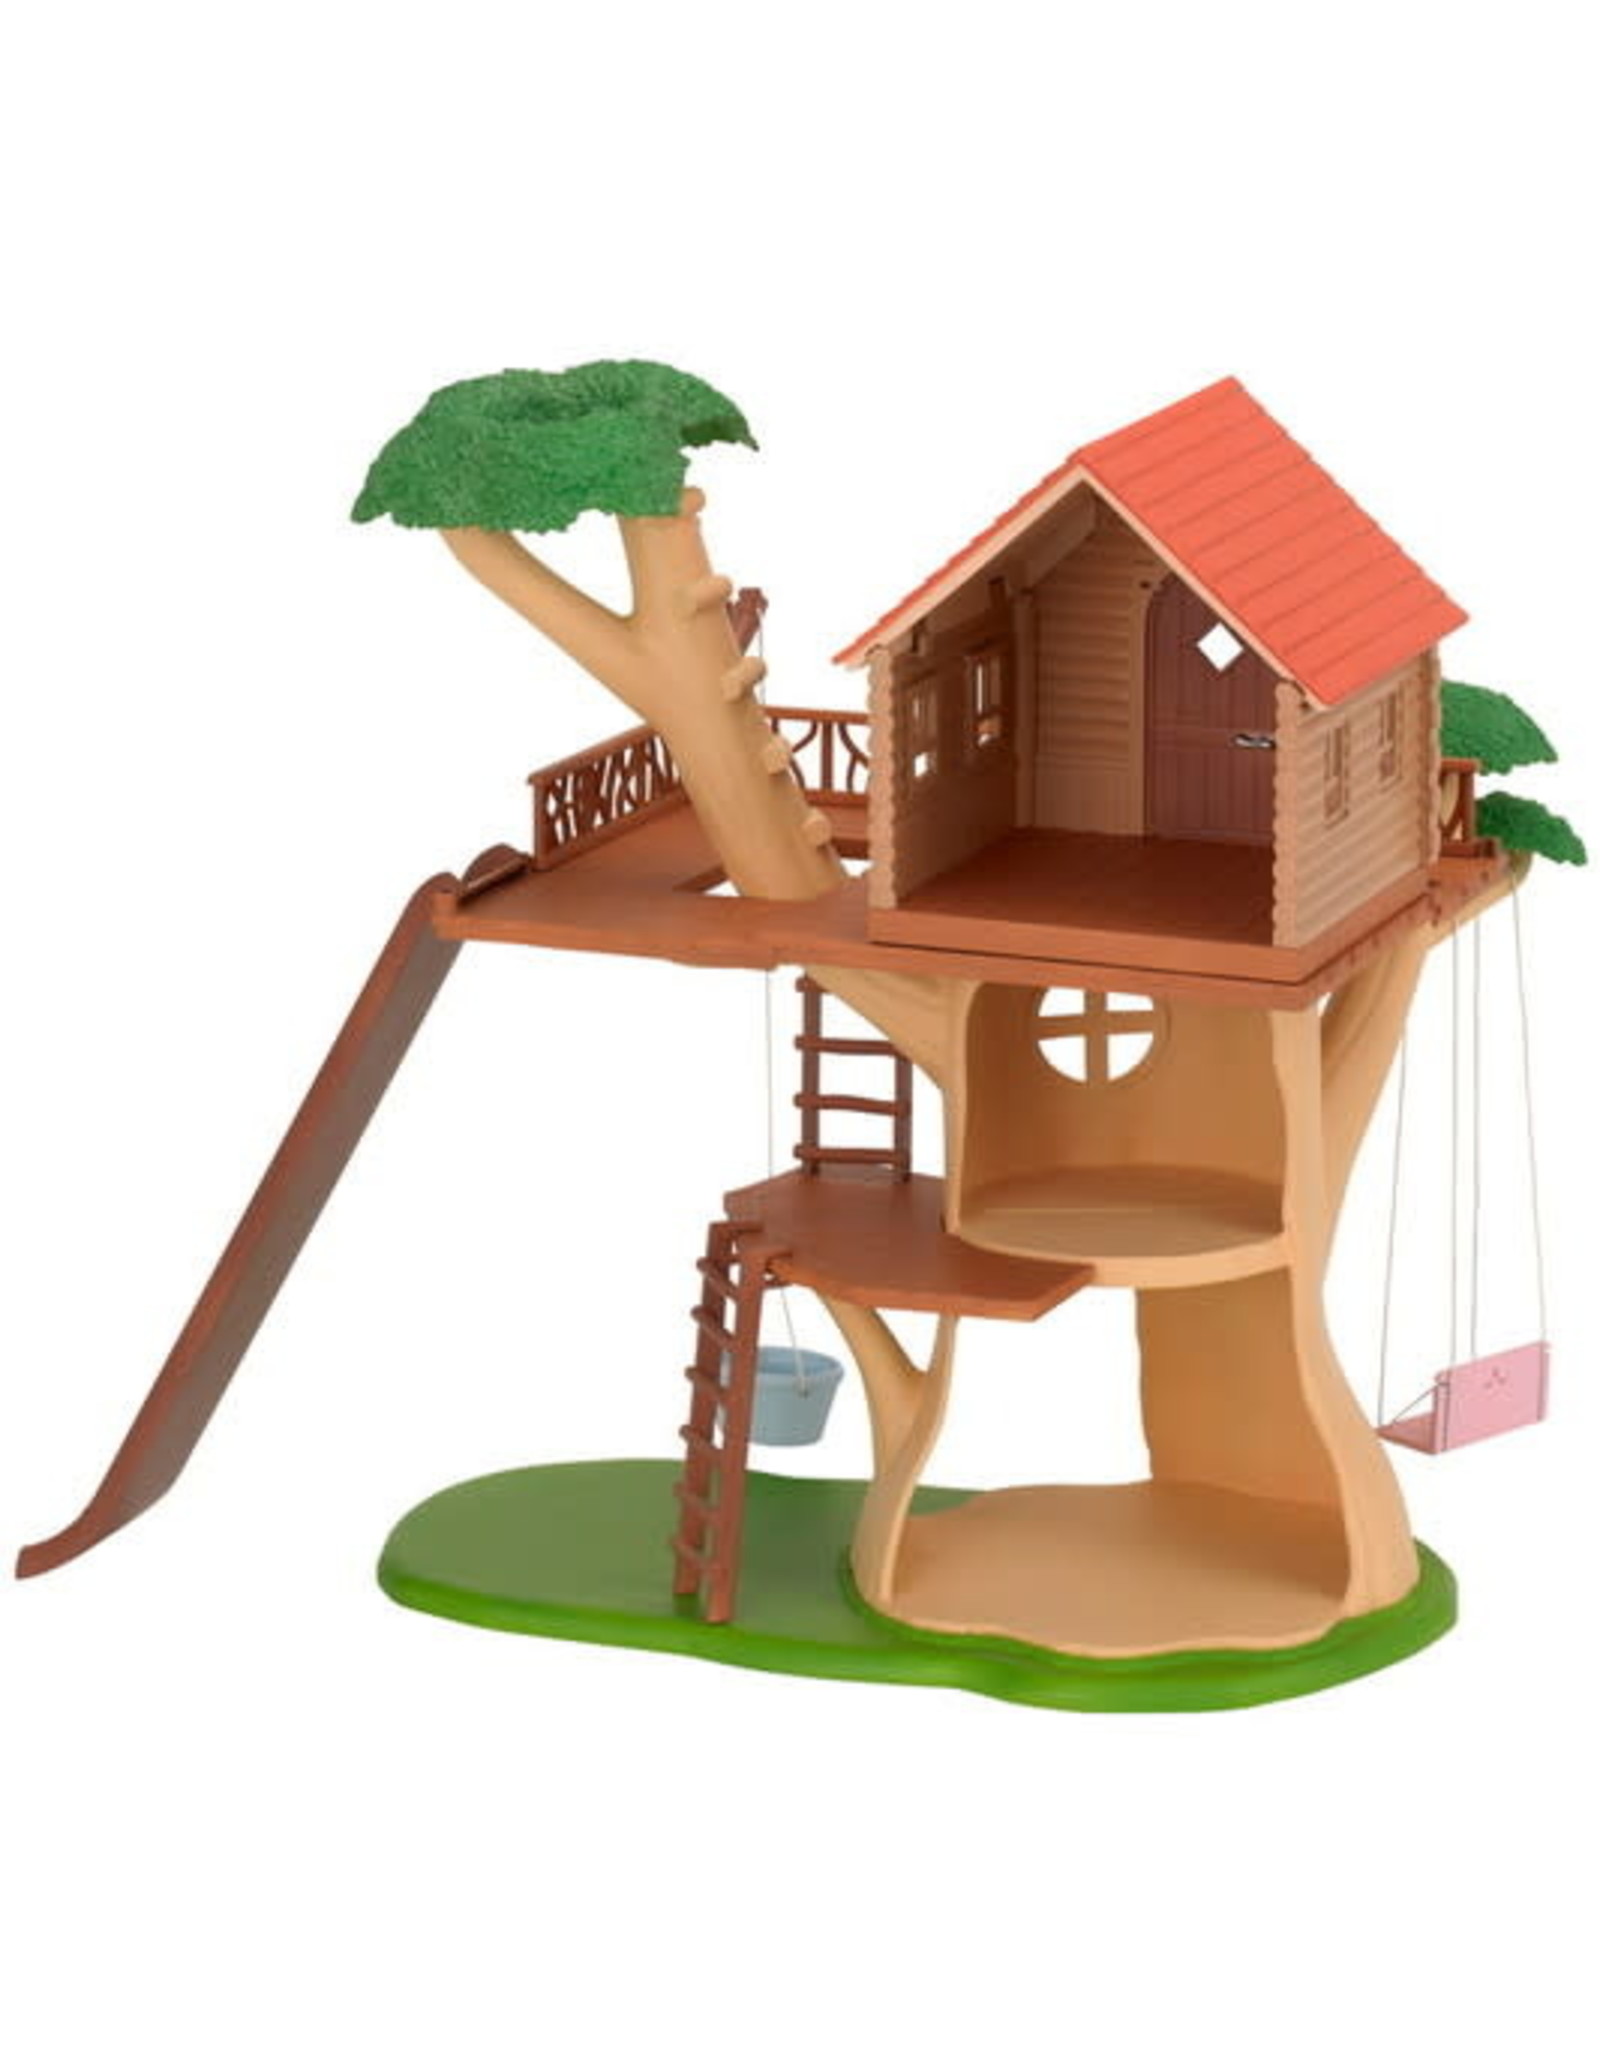 Calico Critters Calico Critters Adventure Treehouse